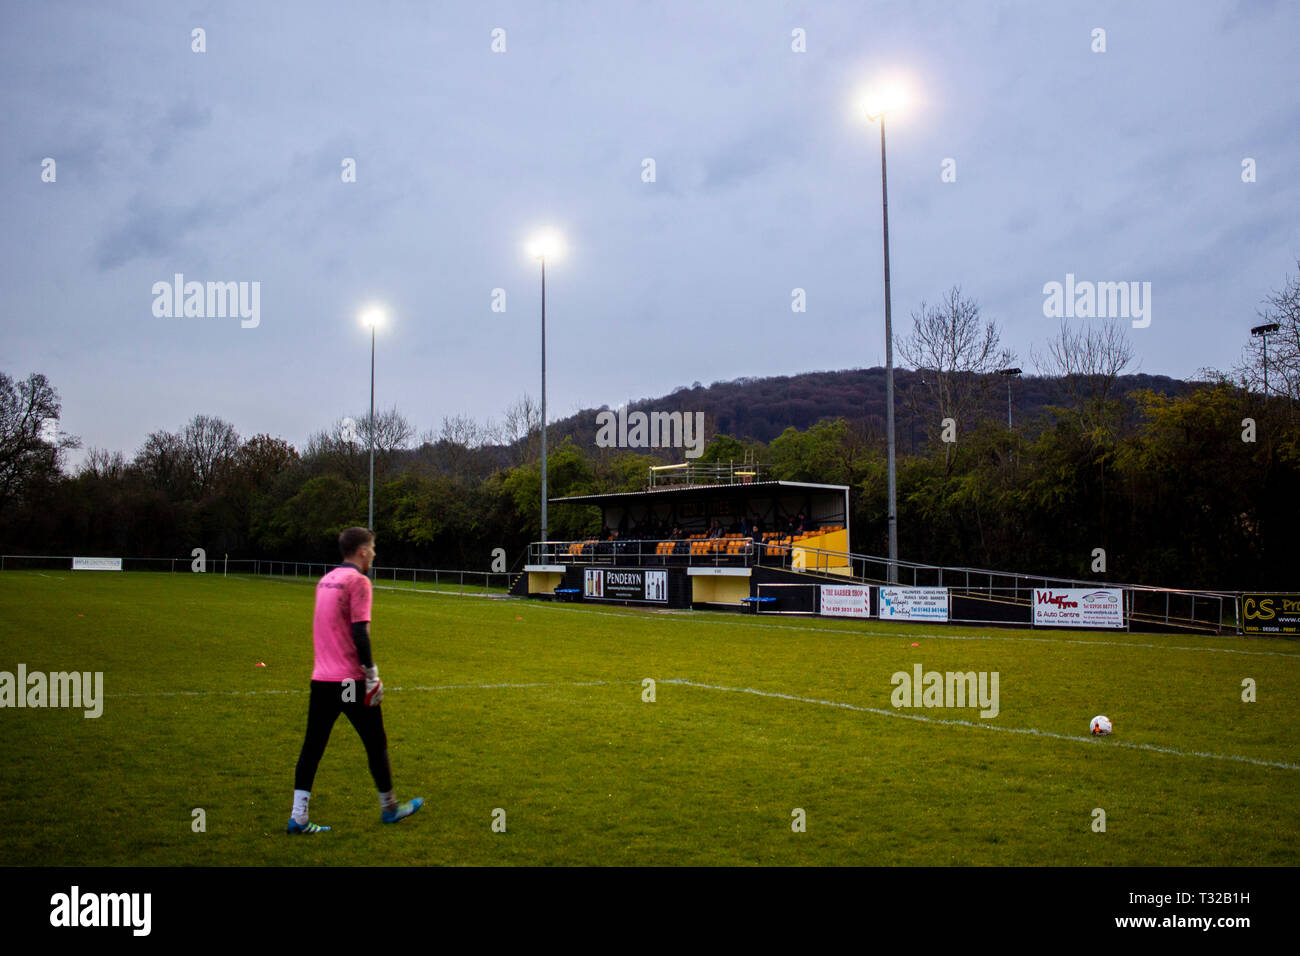 Taffs Well v Penybont in Welsh Football League Division One at the Rhiw'r Ddar Stadium. Stock Photo